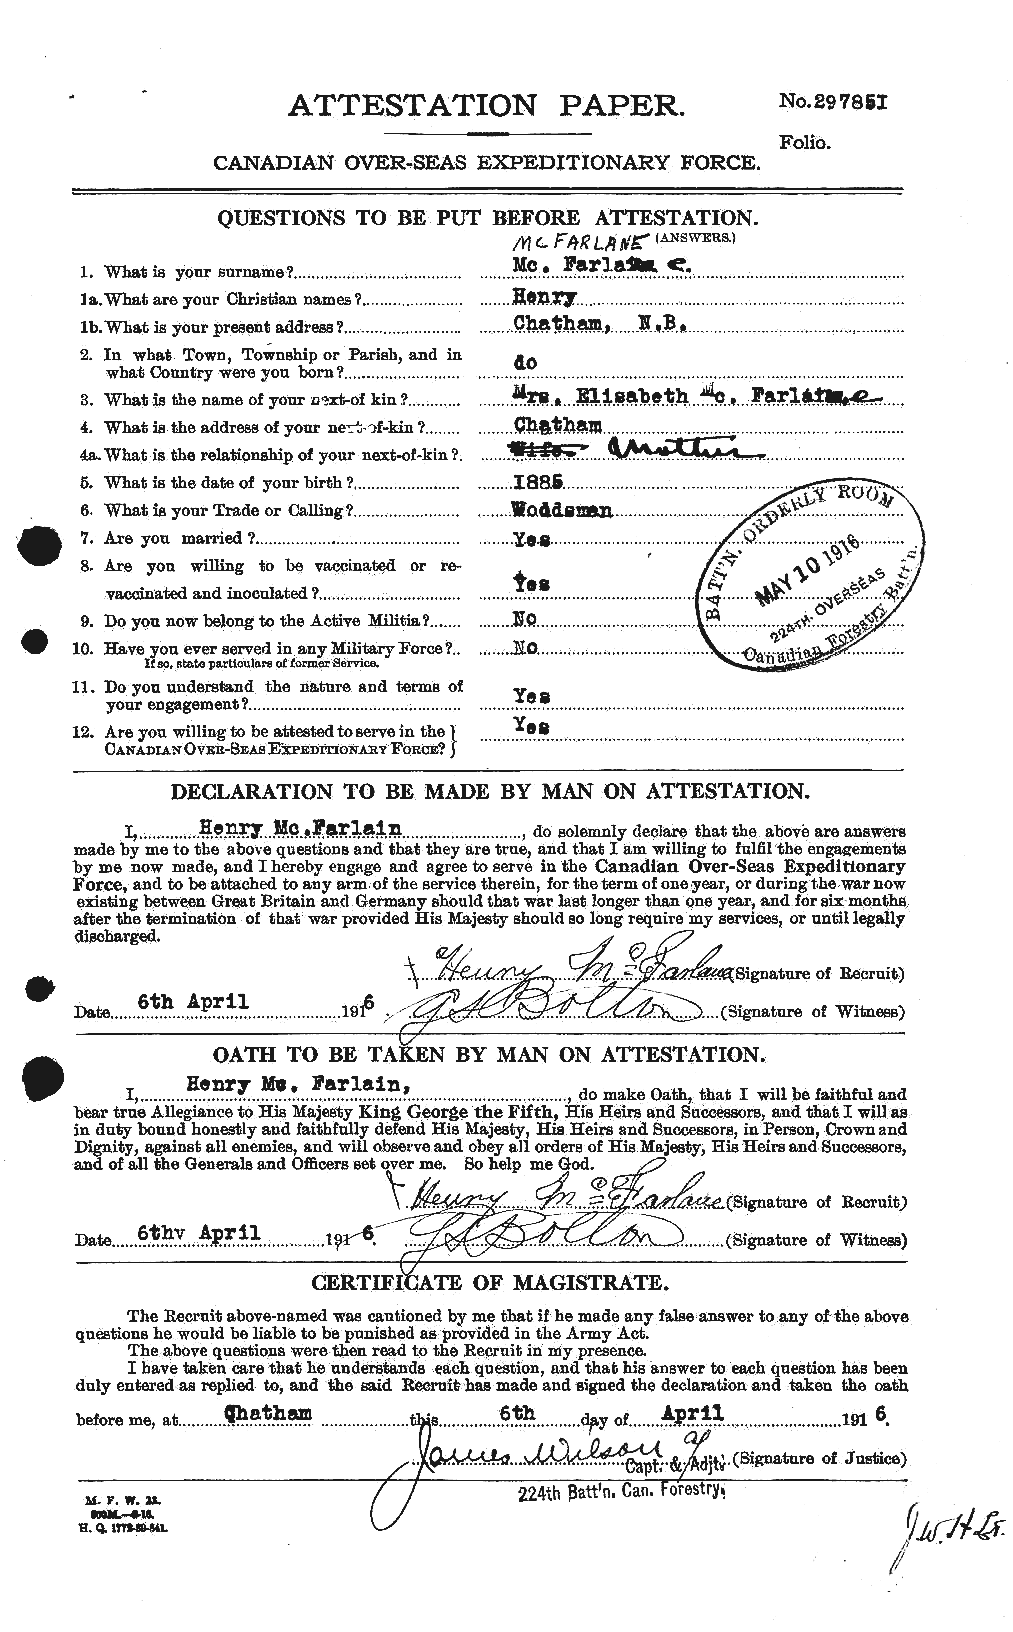 Personnel Records of the First World War - CEF 521819a